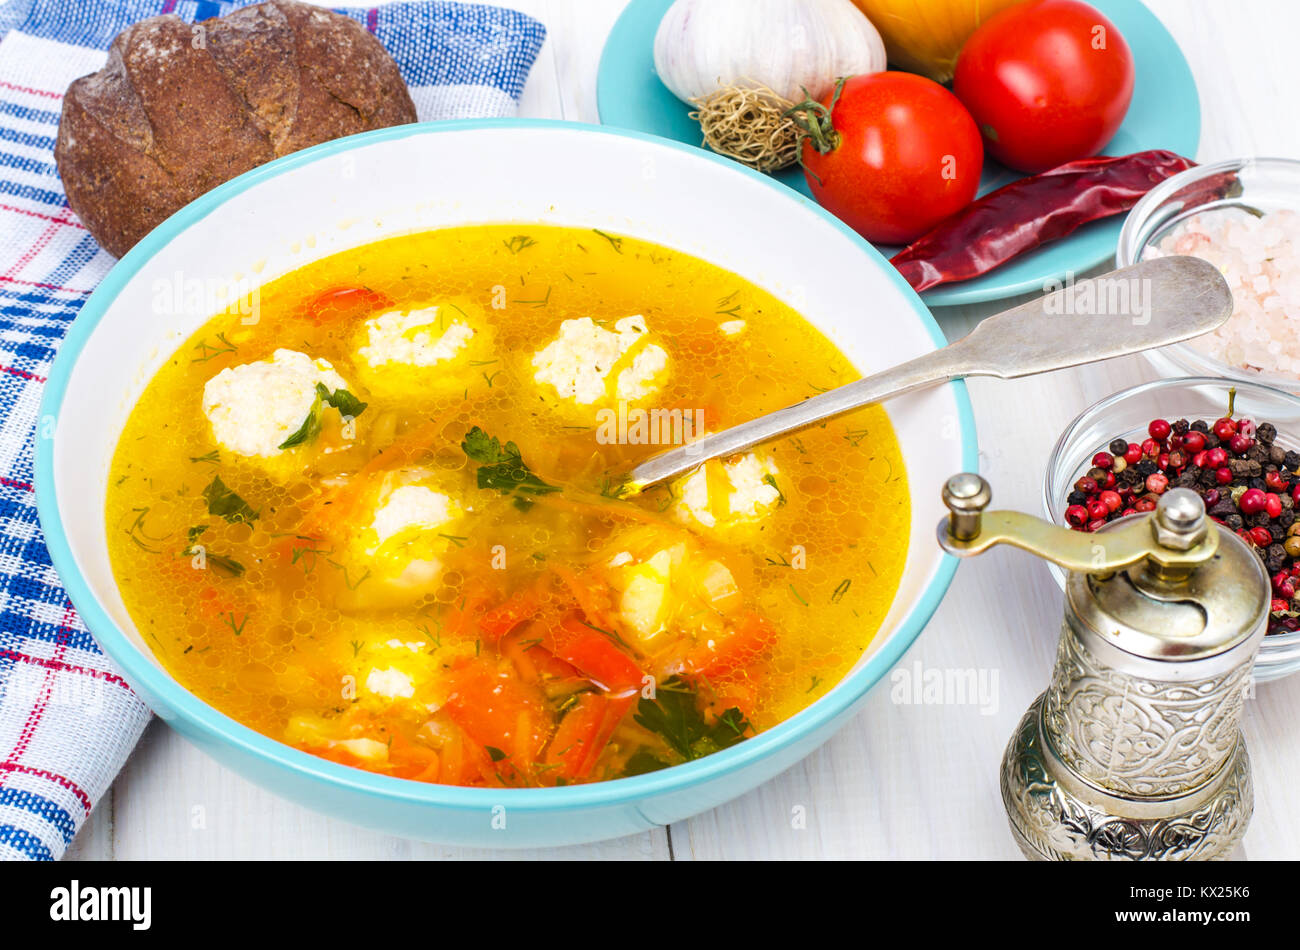 Plate of soup with meatballs on white wooden table Stock Photo